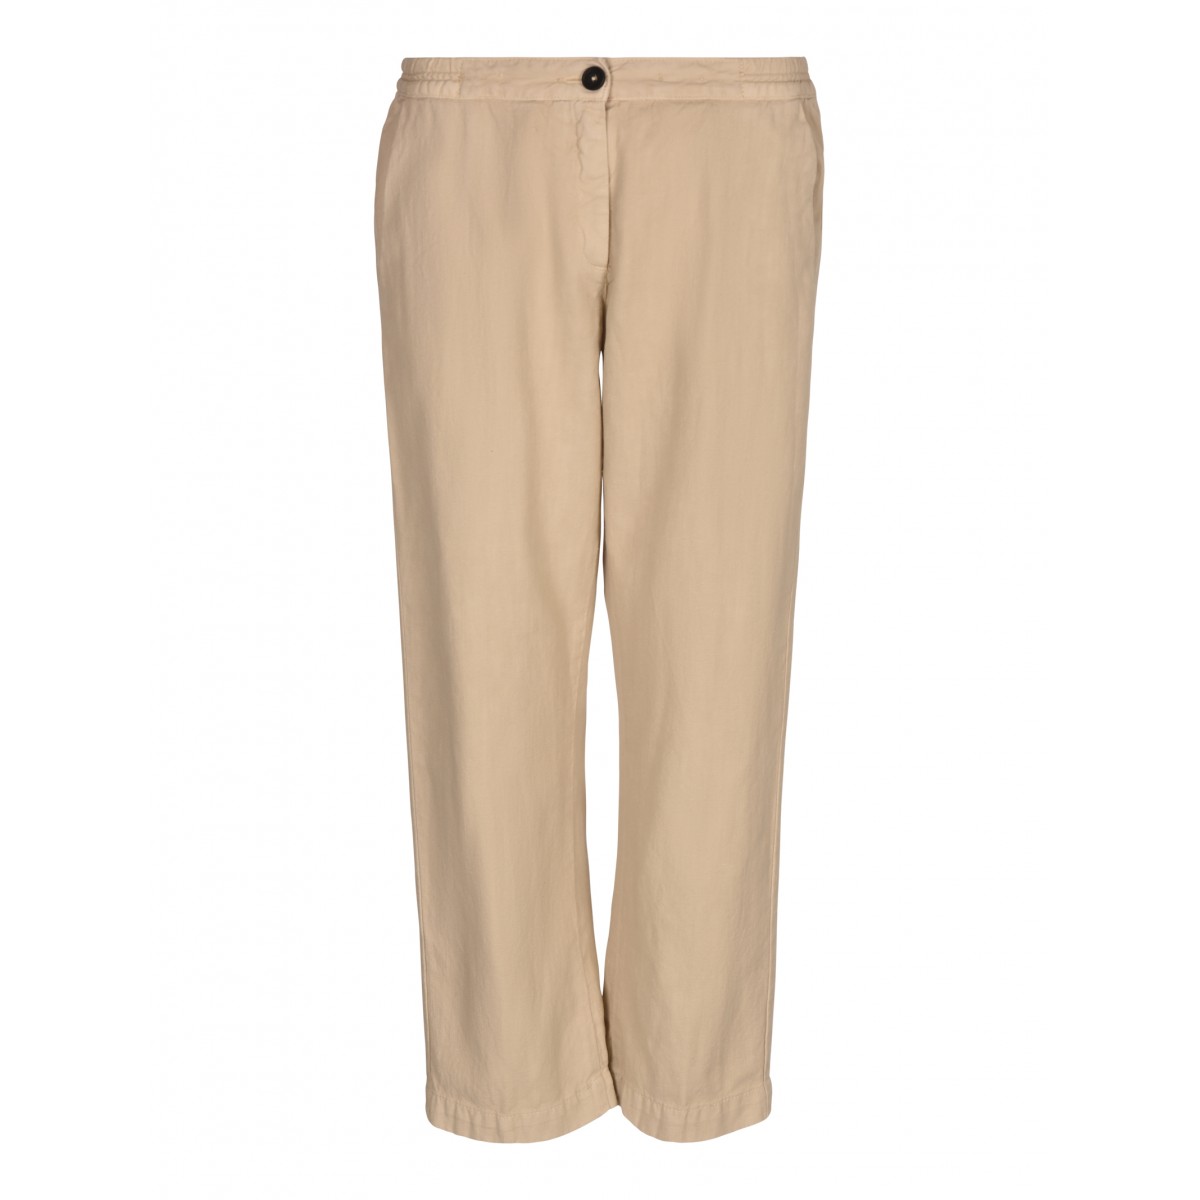 Beige Cotton and Linen Chino Pants